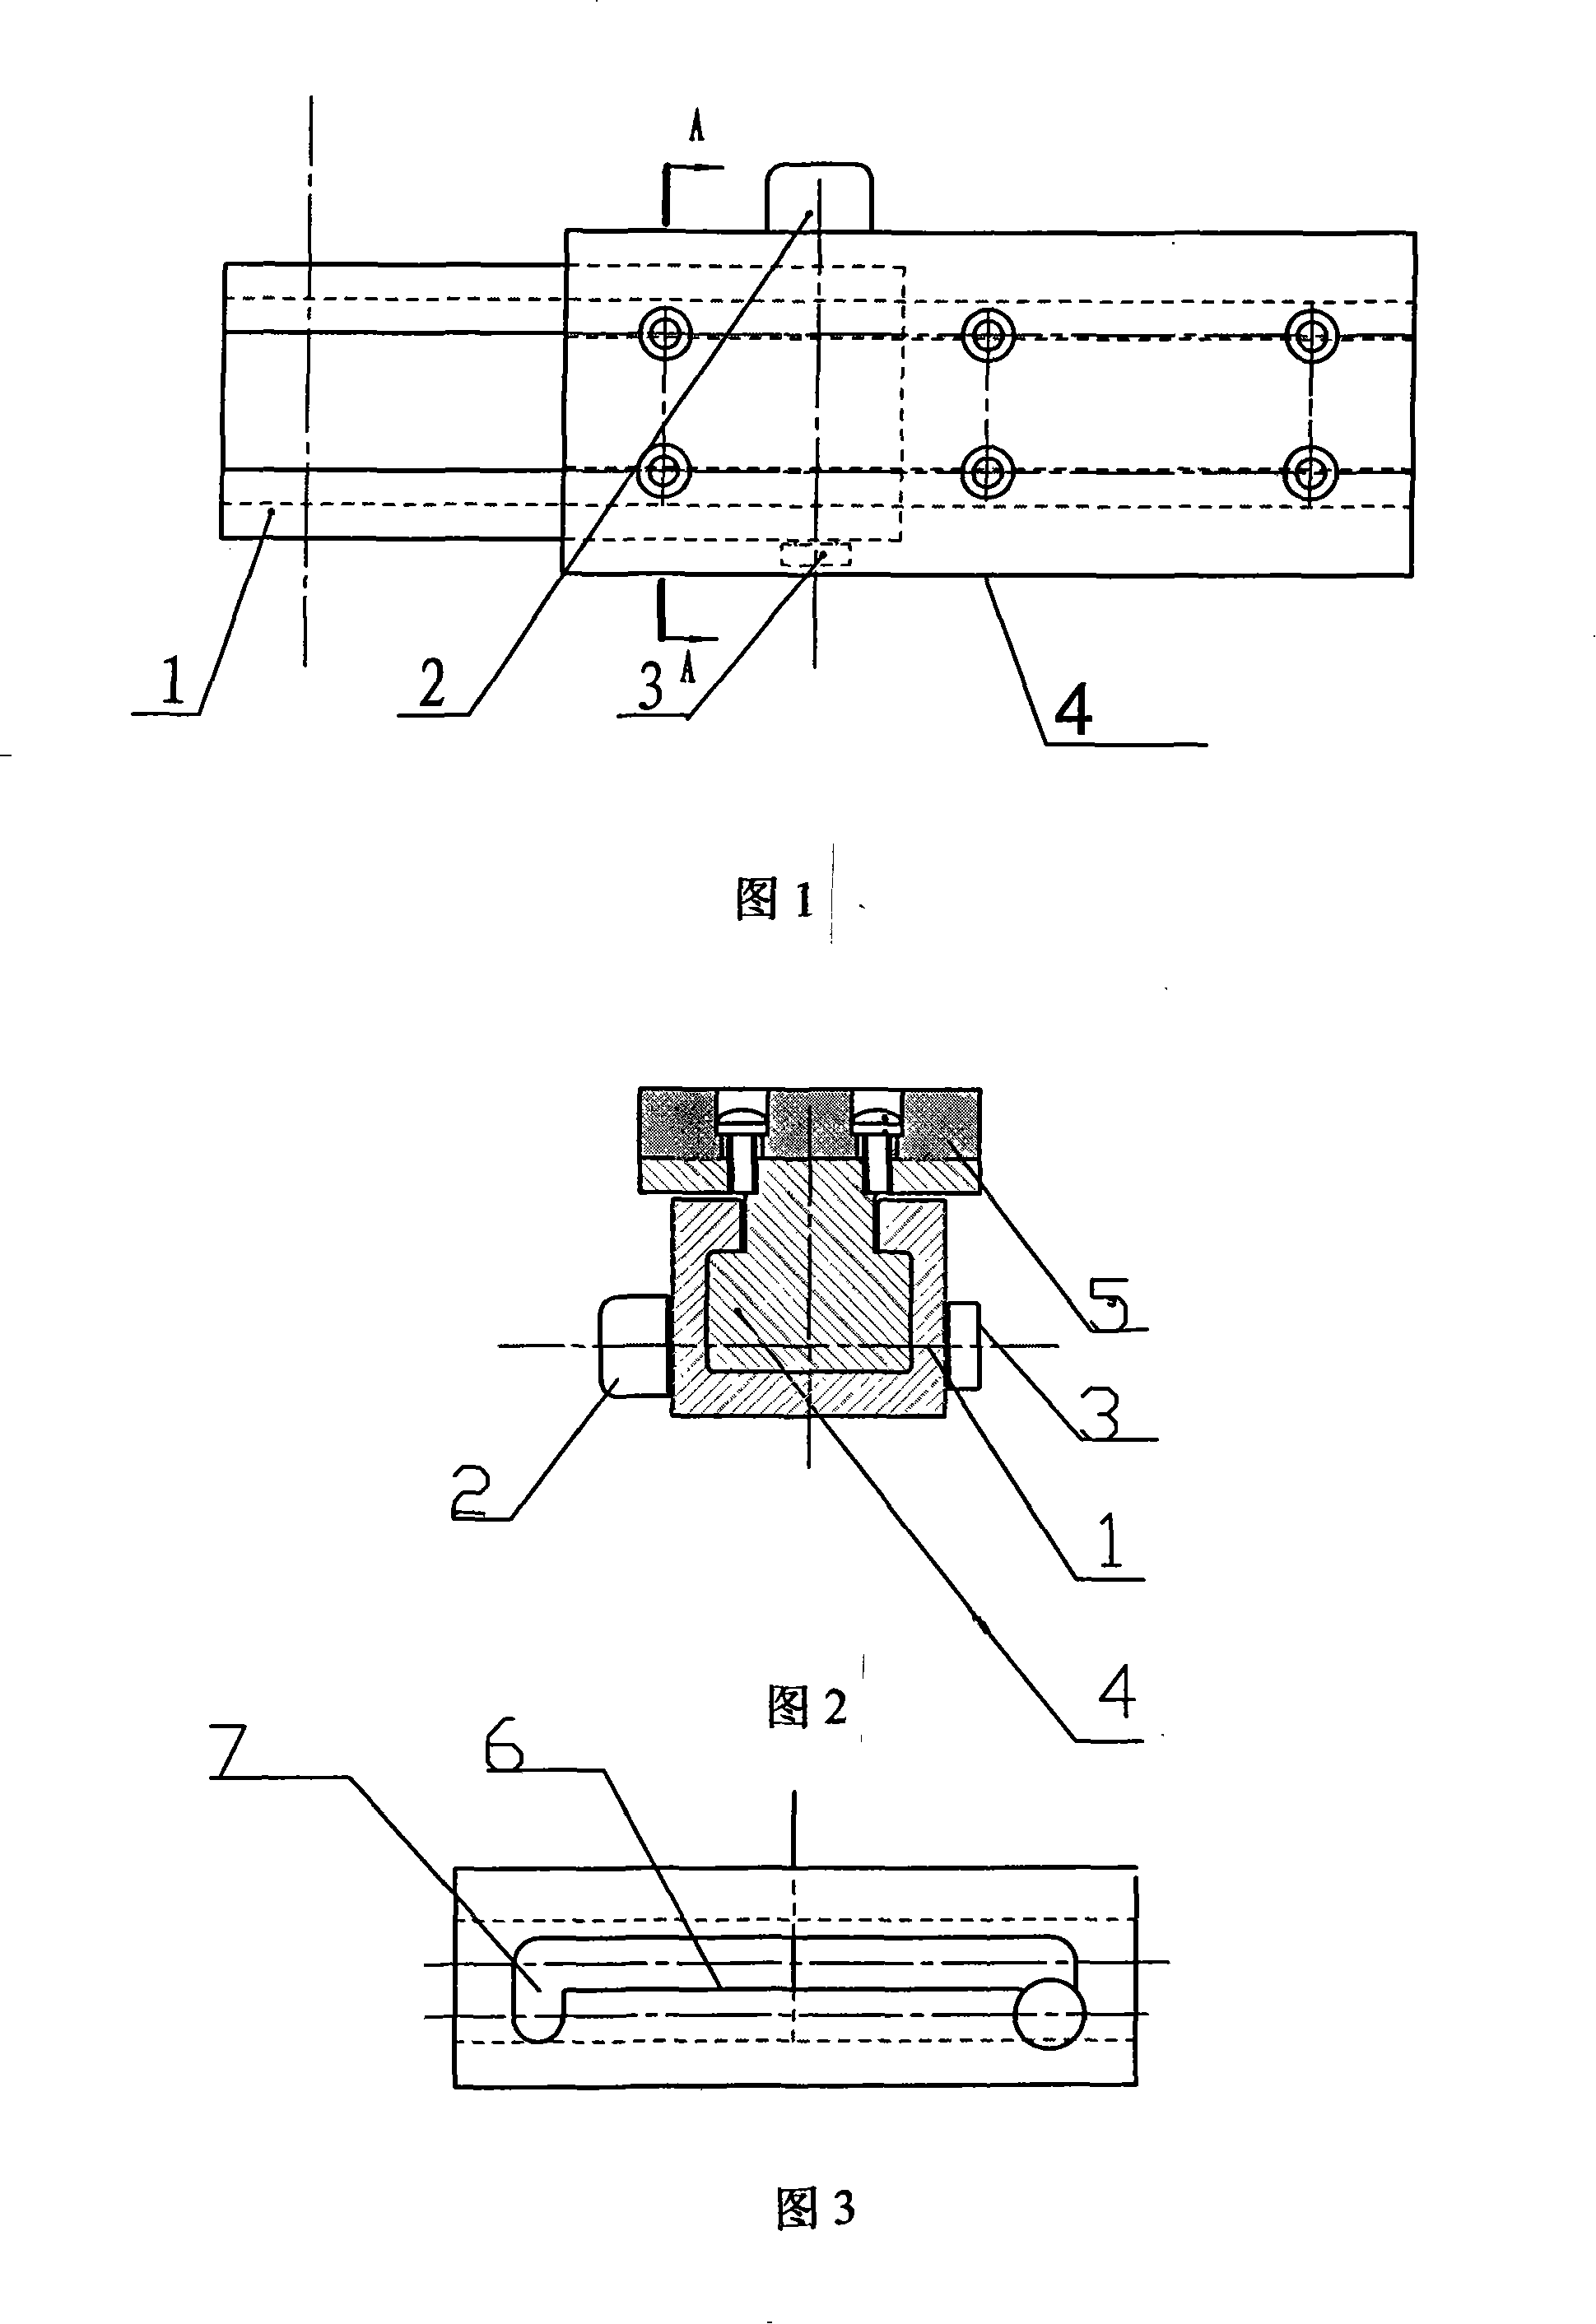 Holding tool shared quick changing support of the vehicle final assembly conveying system